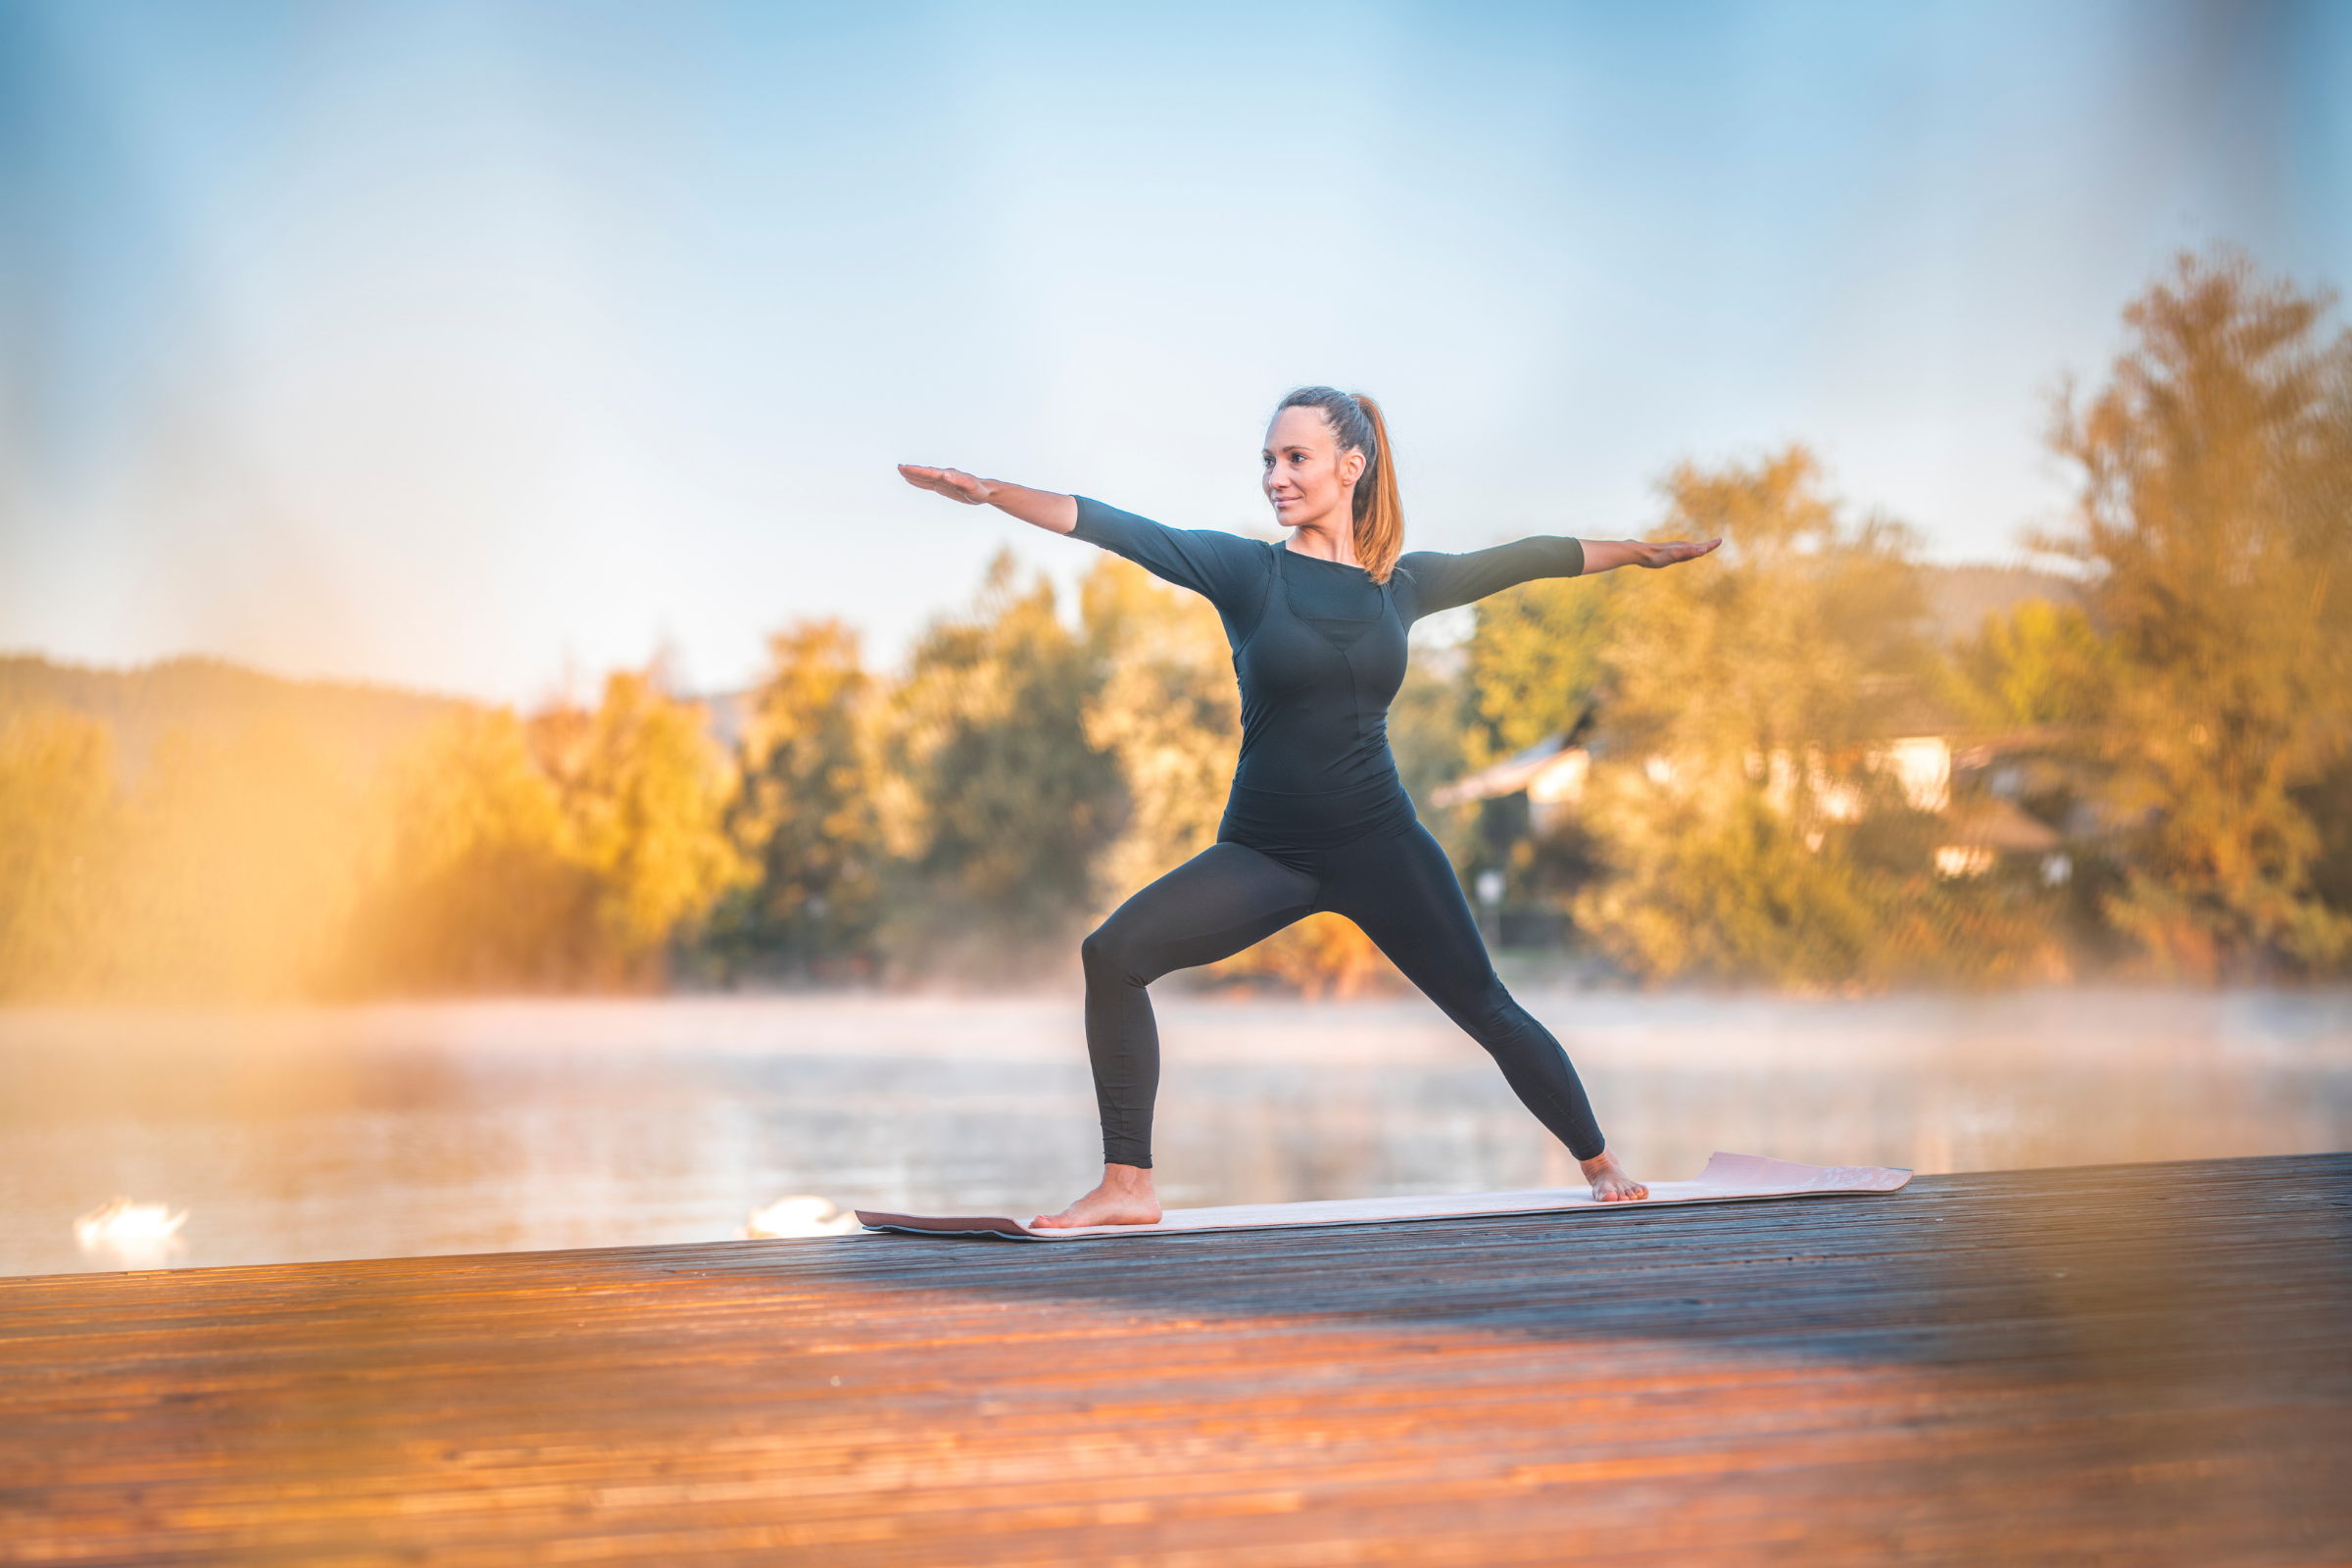 blonde woman with ponytail wearing all black on a wooden dock by water doing warrior II yoga pose